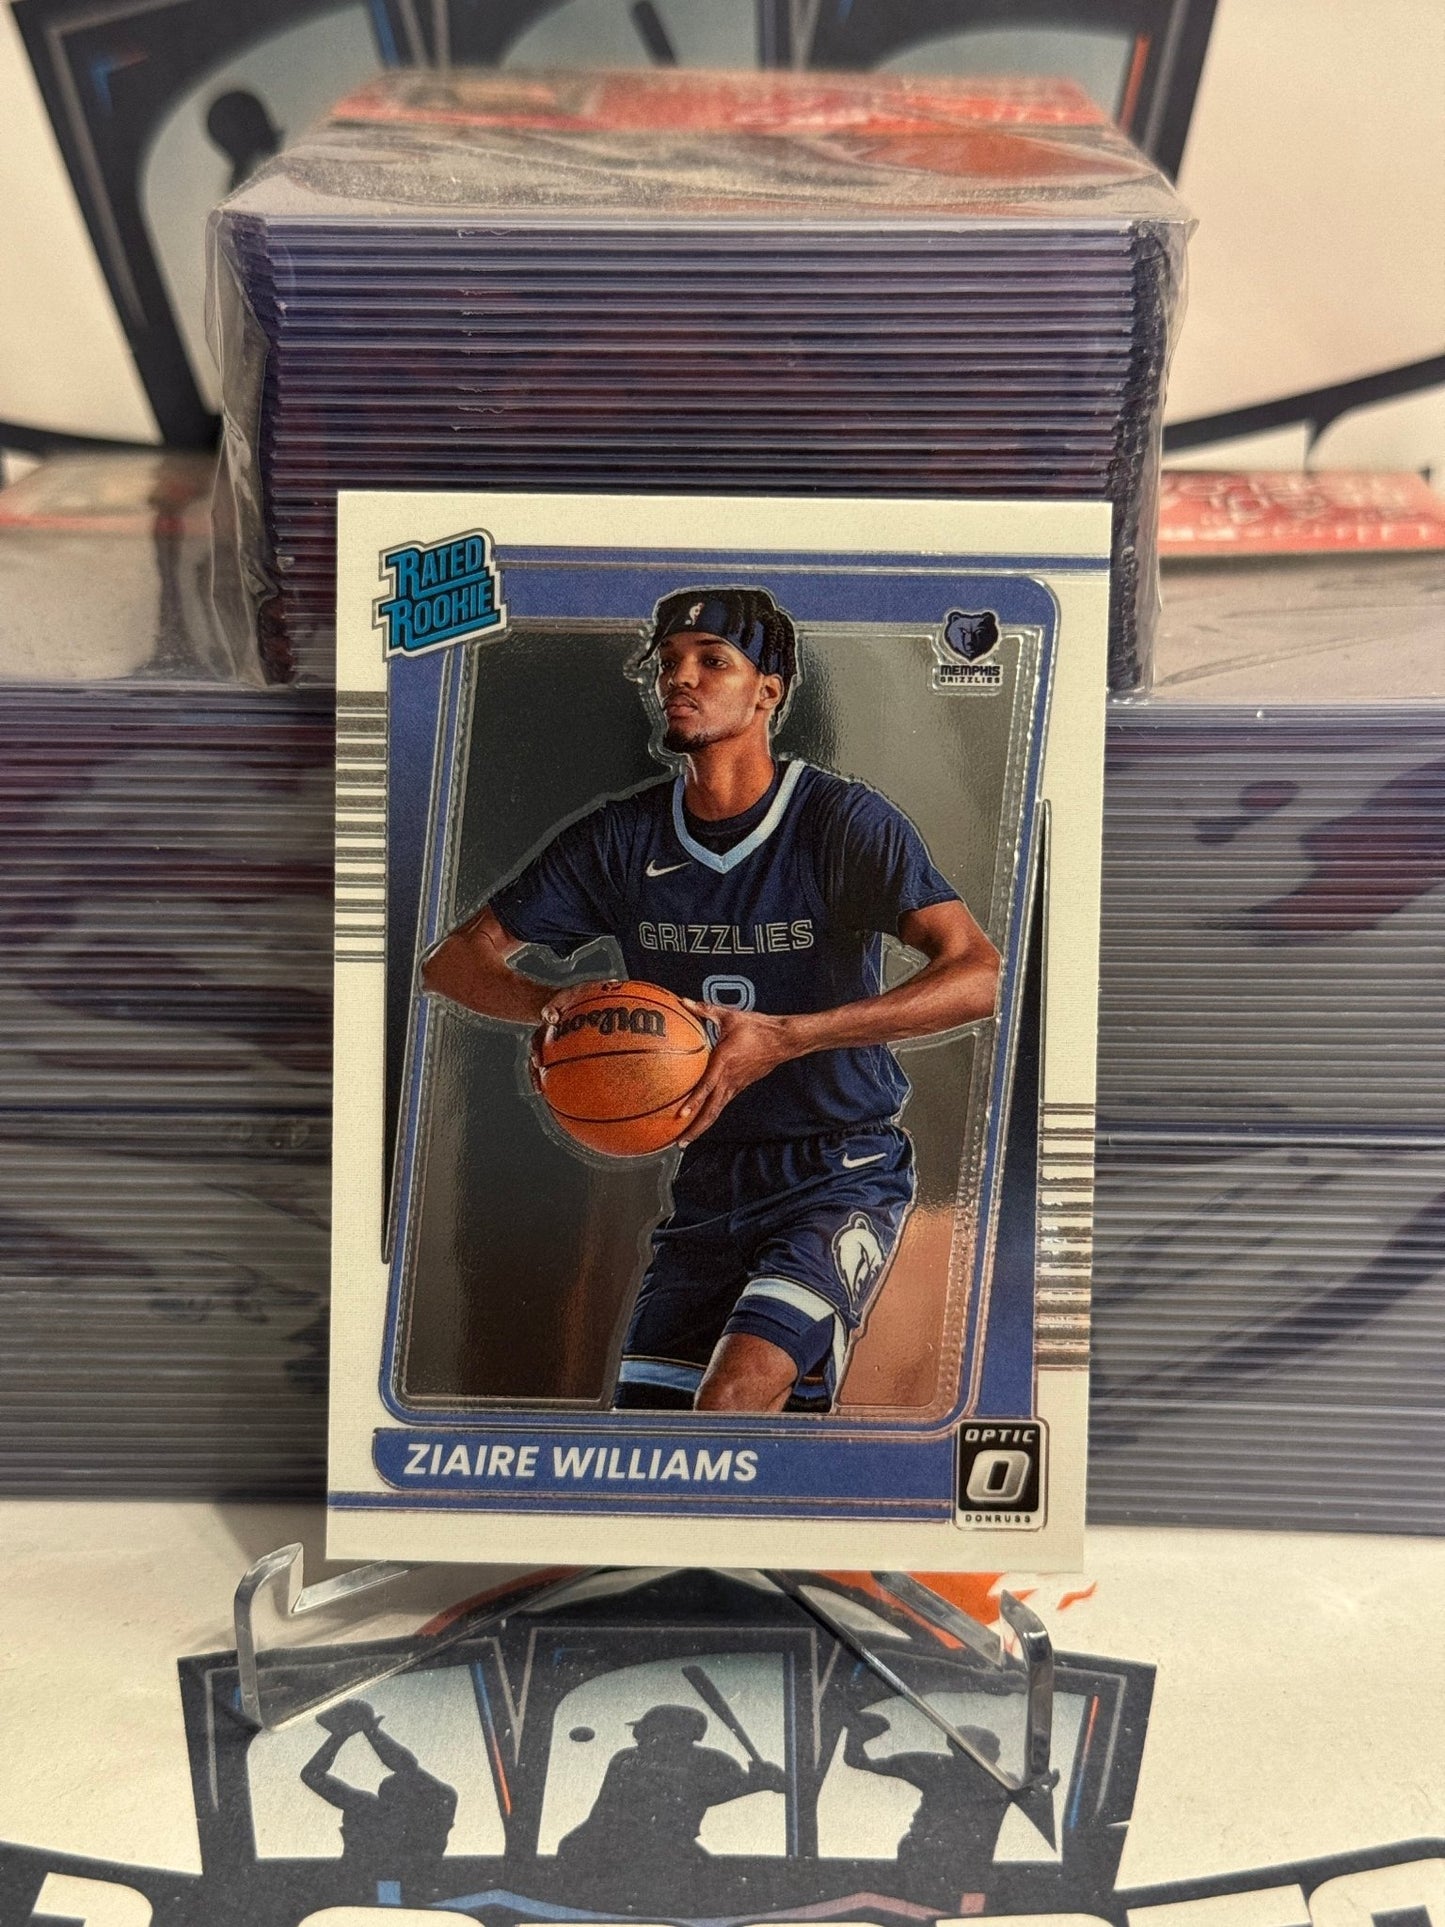 2021 Donruss Optic (Rated Rookie) Ziaire Williams #198